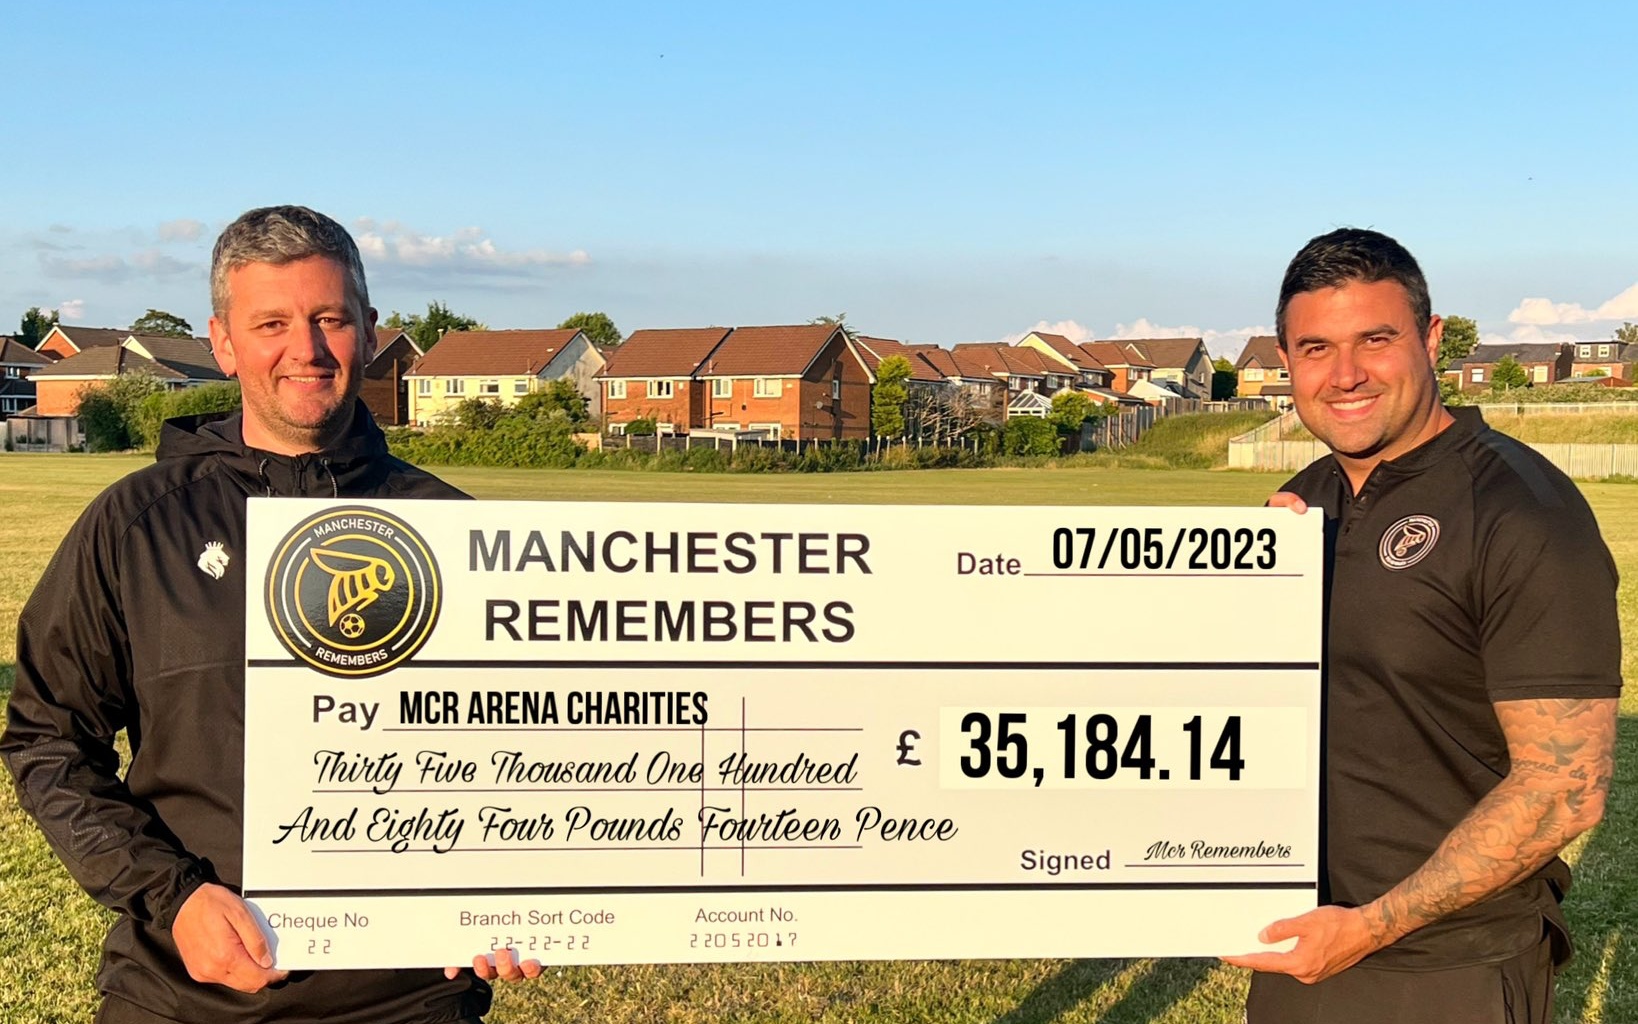 Manchester Remembers charity match money raised